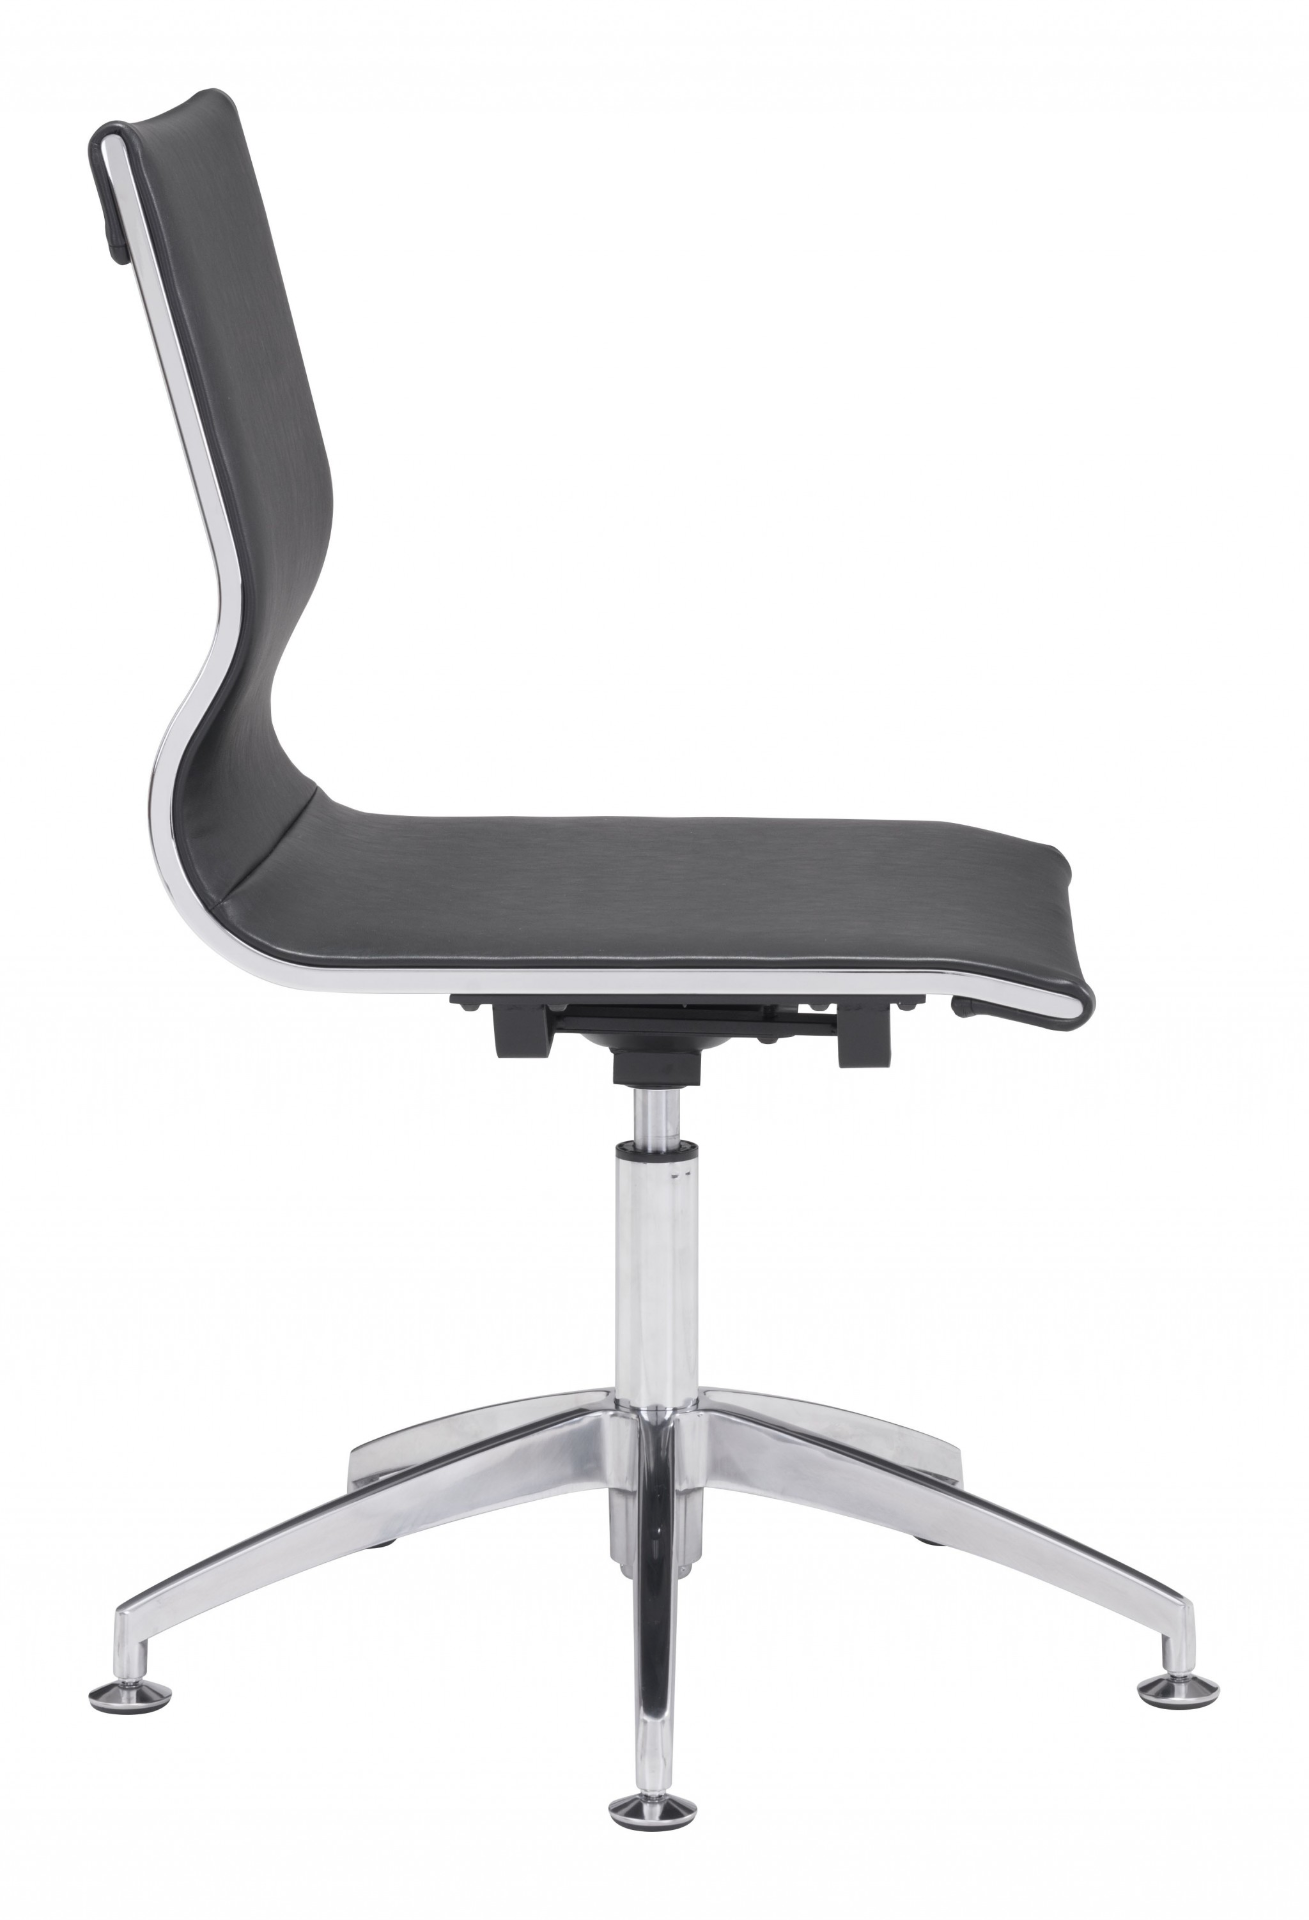 Ergonomic Conference Room Office Chair Armless - Black